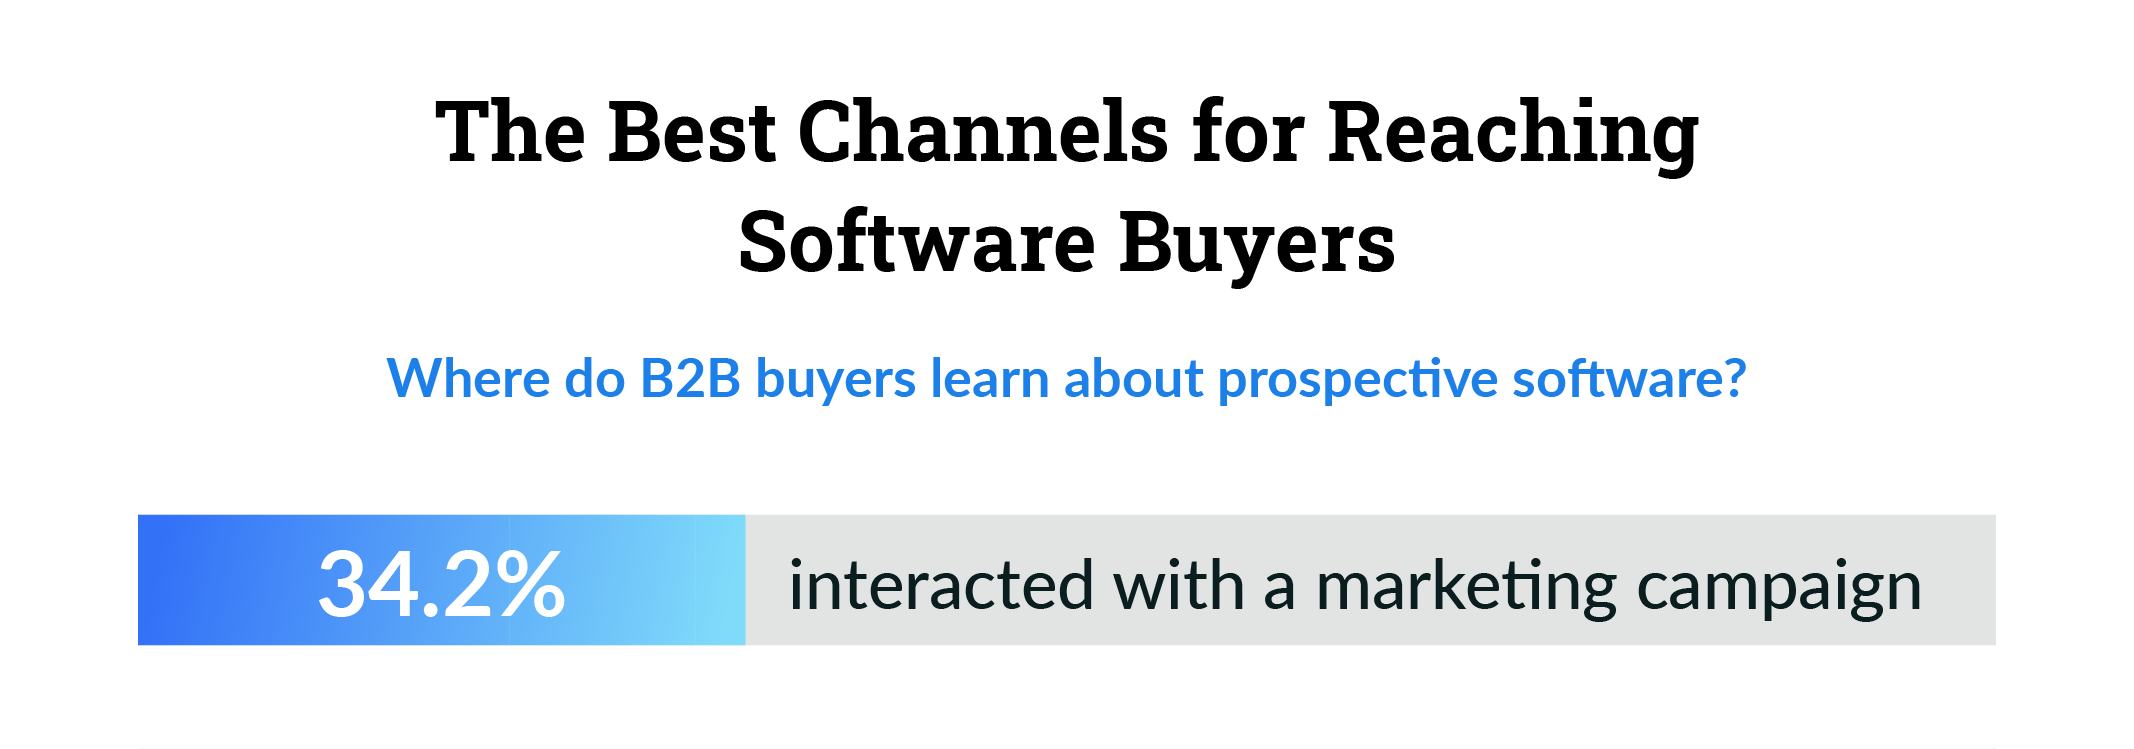 best channels for reaching software buyers